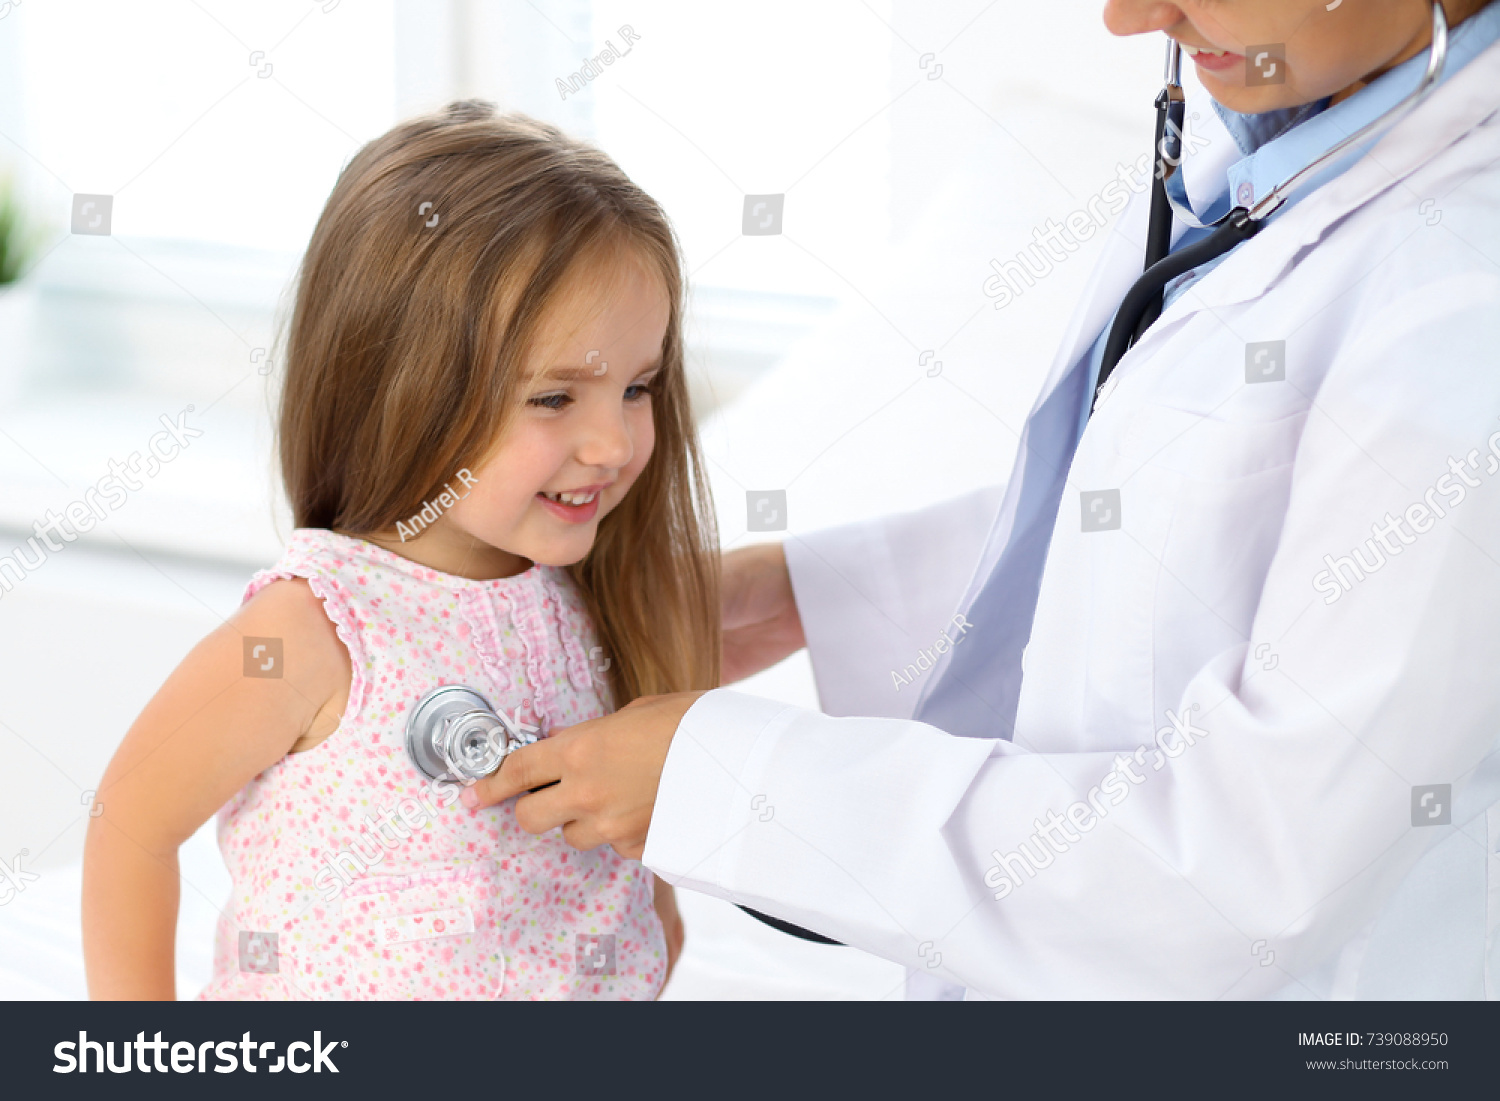 Doctor examining a little girl by stethoscope #739088950